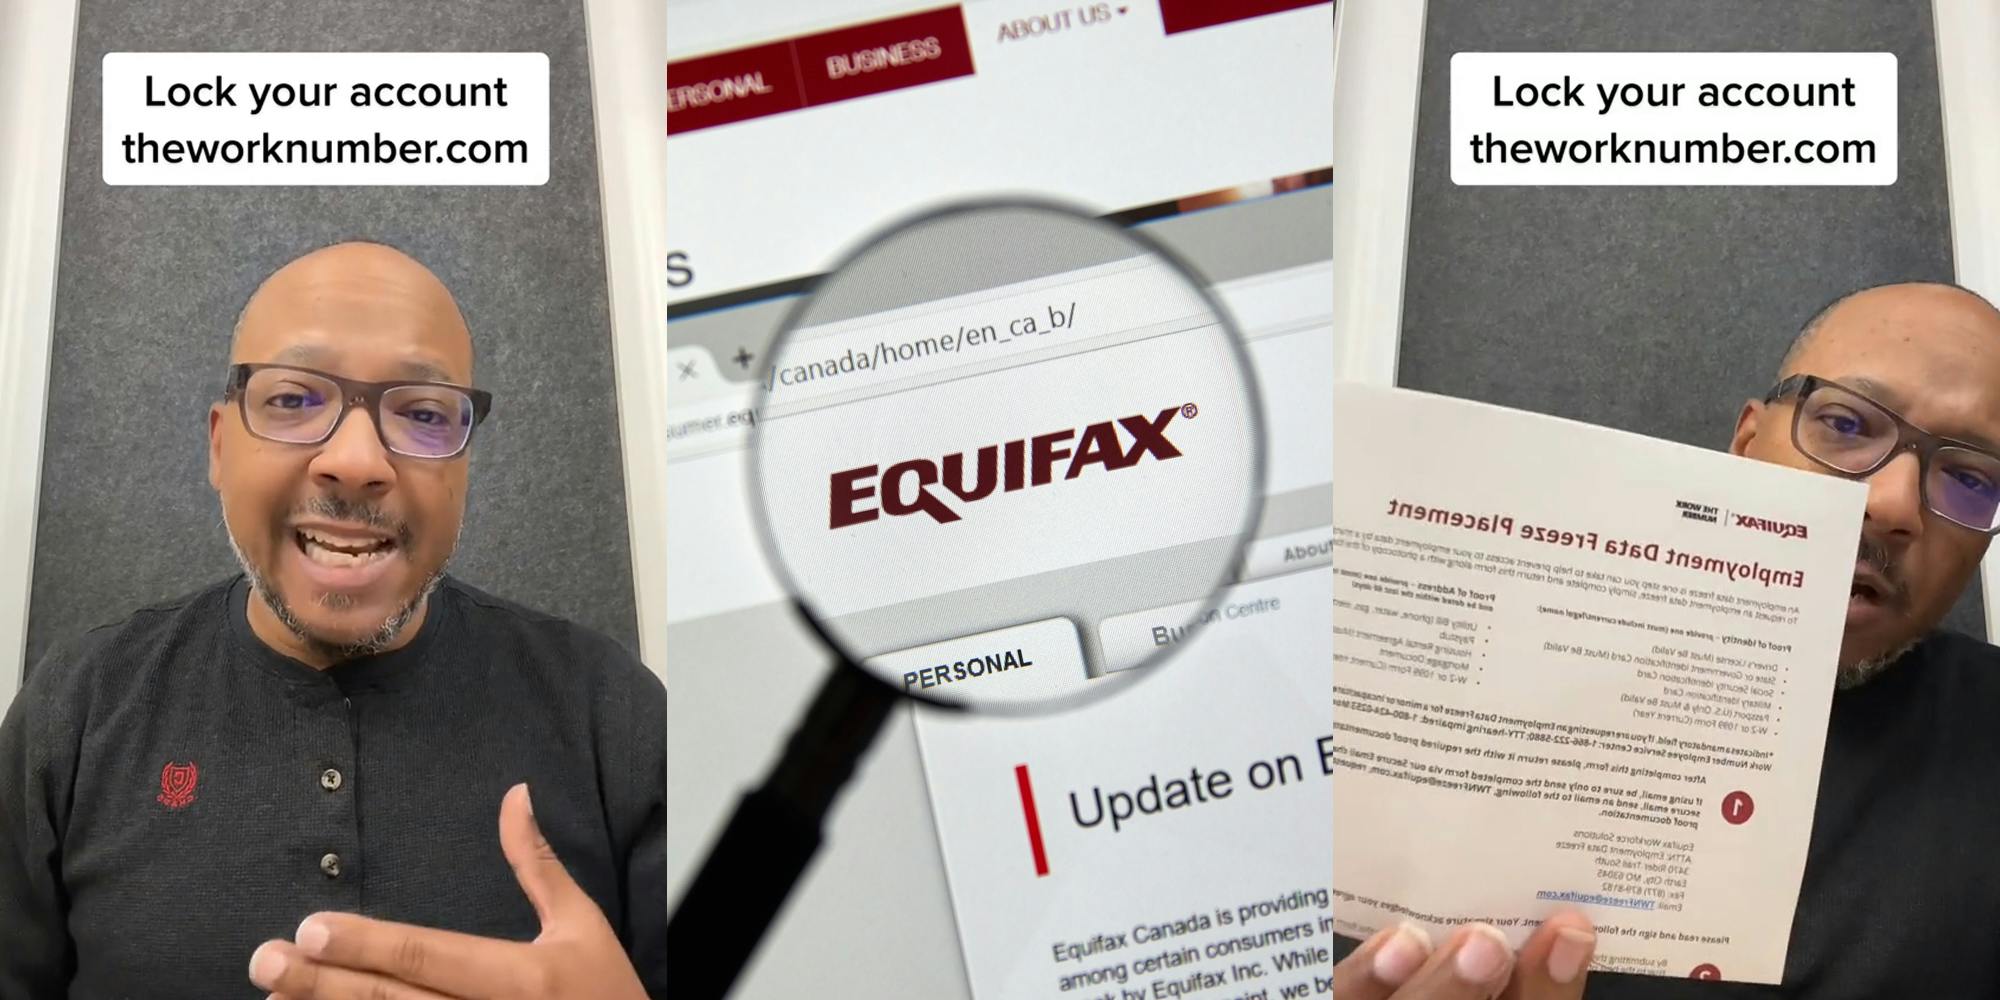 worker speaking with caption "Lock your account theworknumber.com" (l) Equifax in magnifying glass view on screen (c) worker speaking holding Equifax paper with caption "Lock your account theworknumber.com" (r)